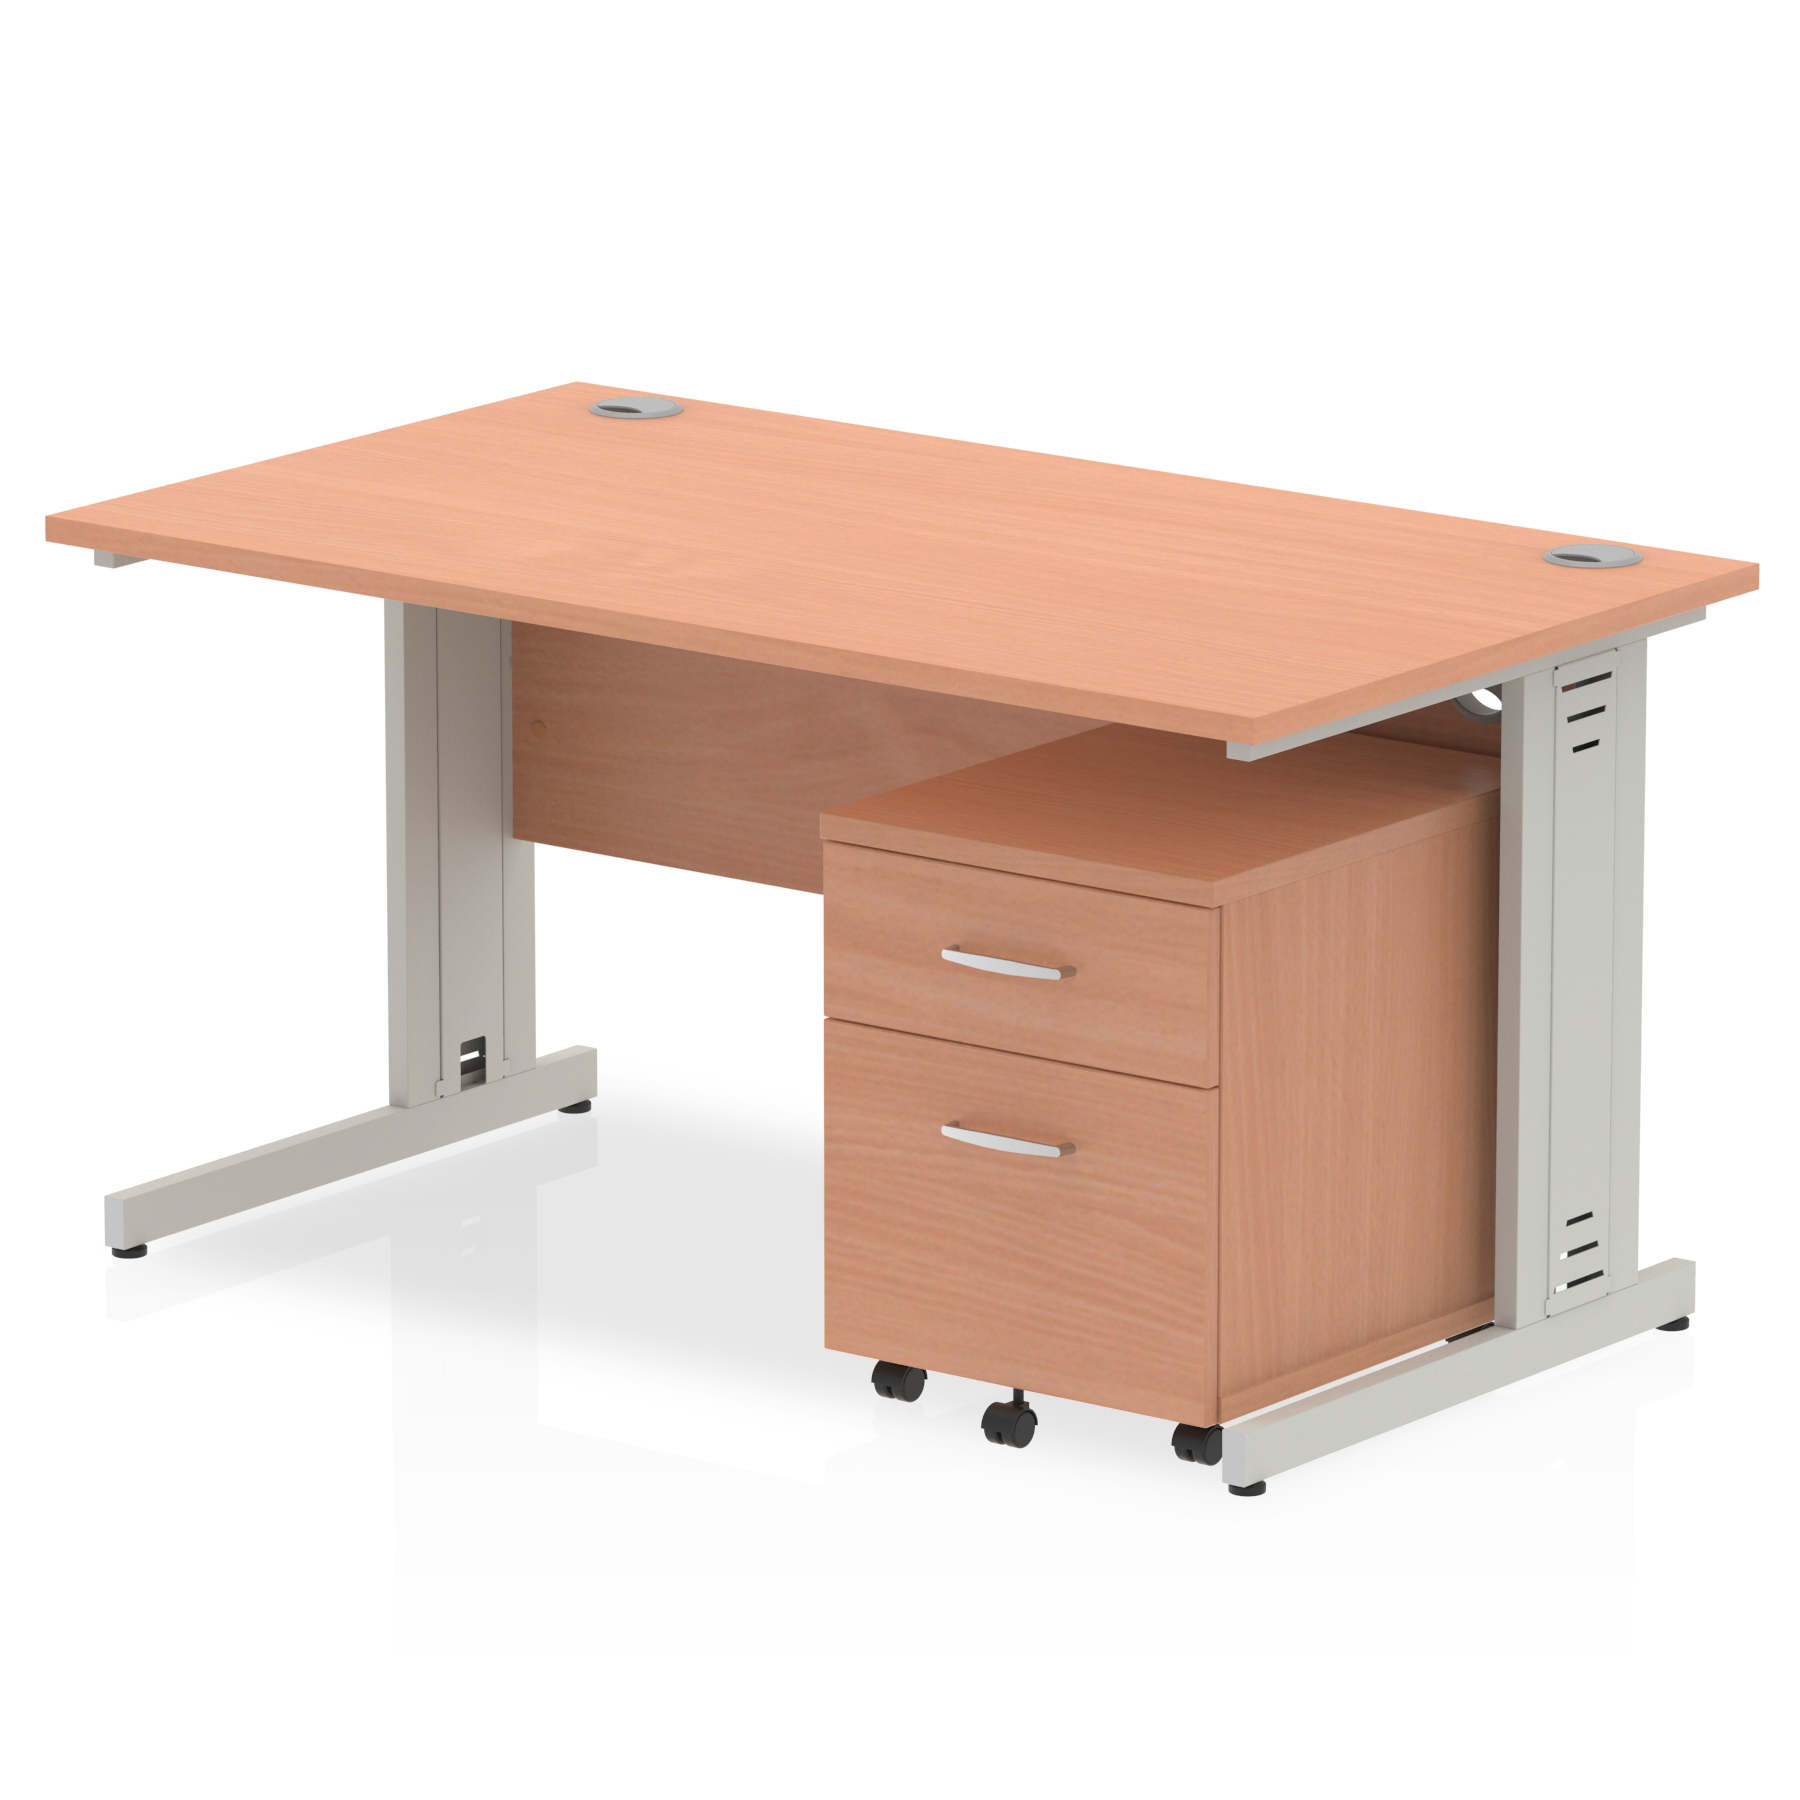 Impulse 1400 x 800mm Straight Desk Beech Top Silver Cable Managed Leg with 2 Drawer Mobile Pedestal Bundle